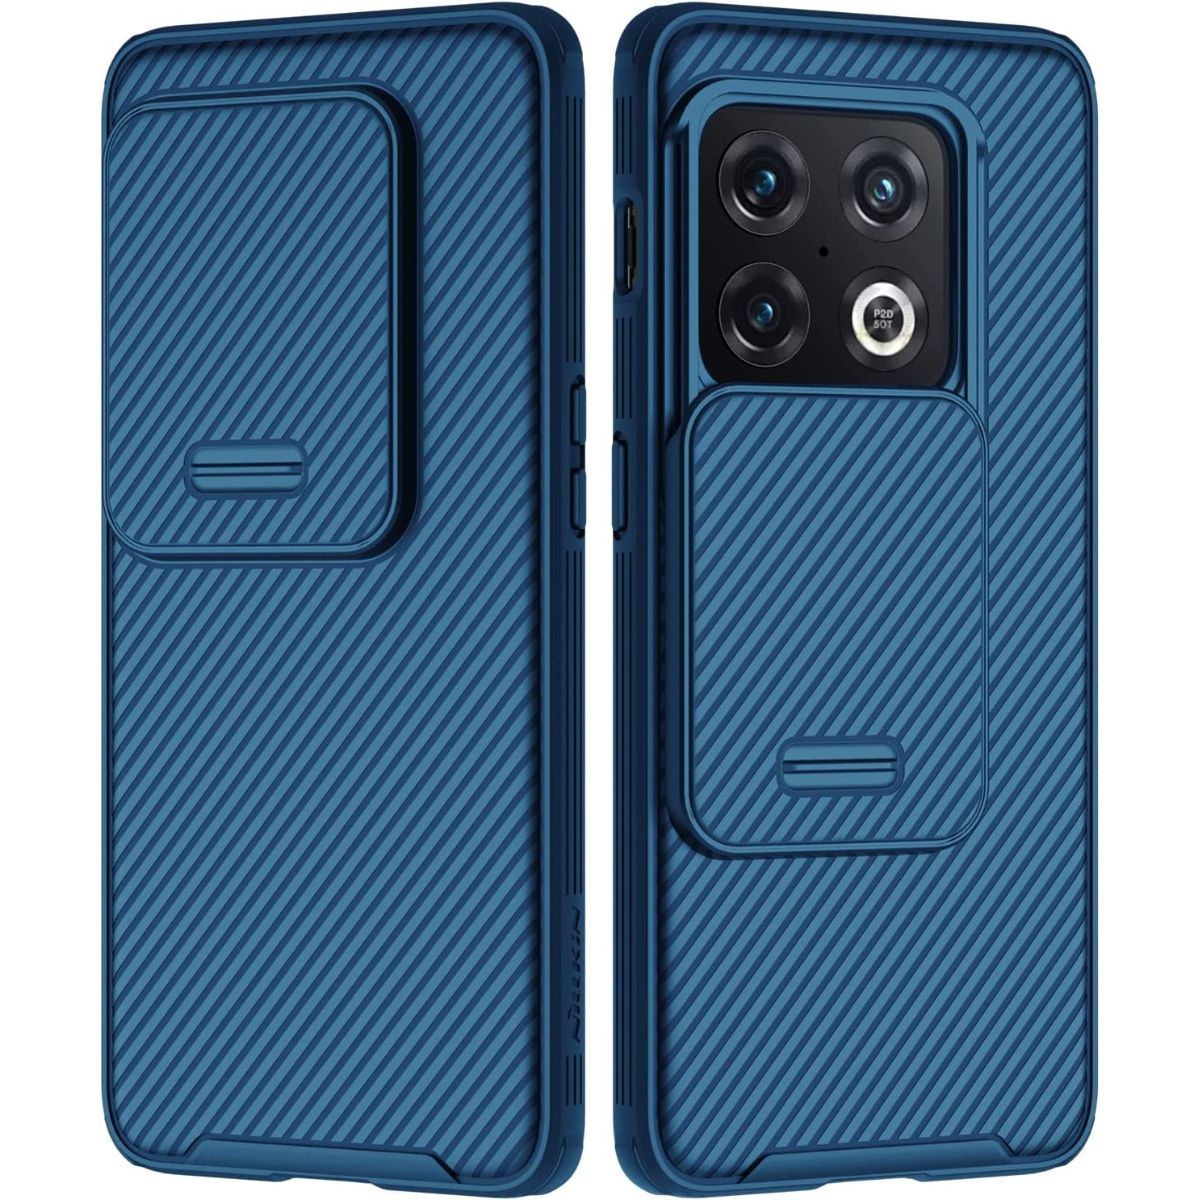 Nillkin OnePlus 10 Pro Case, front and back views